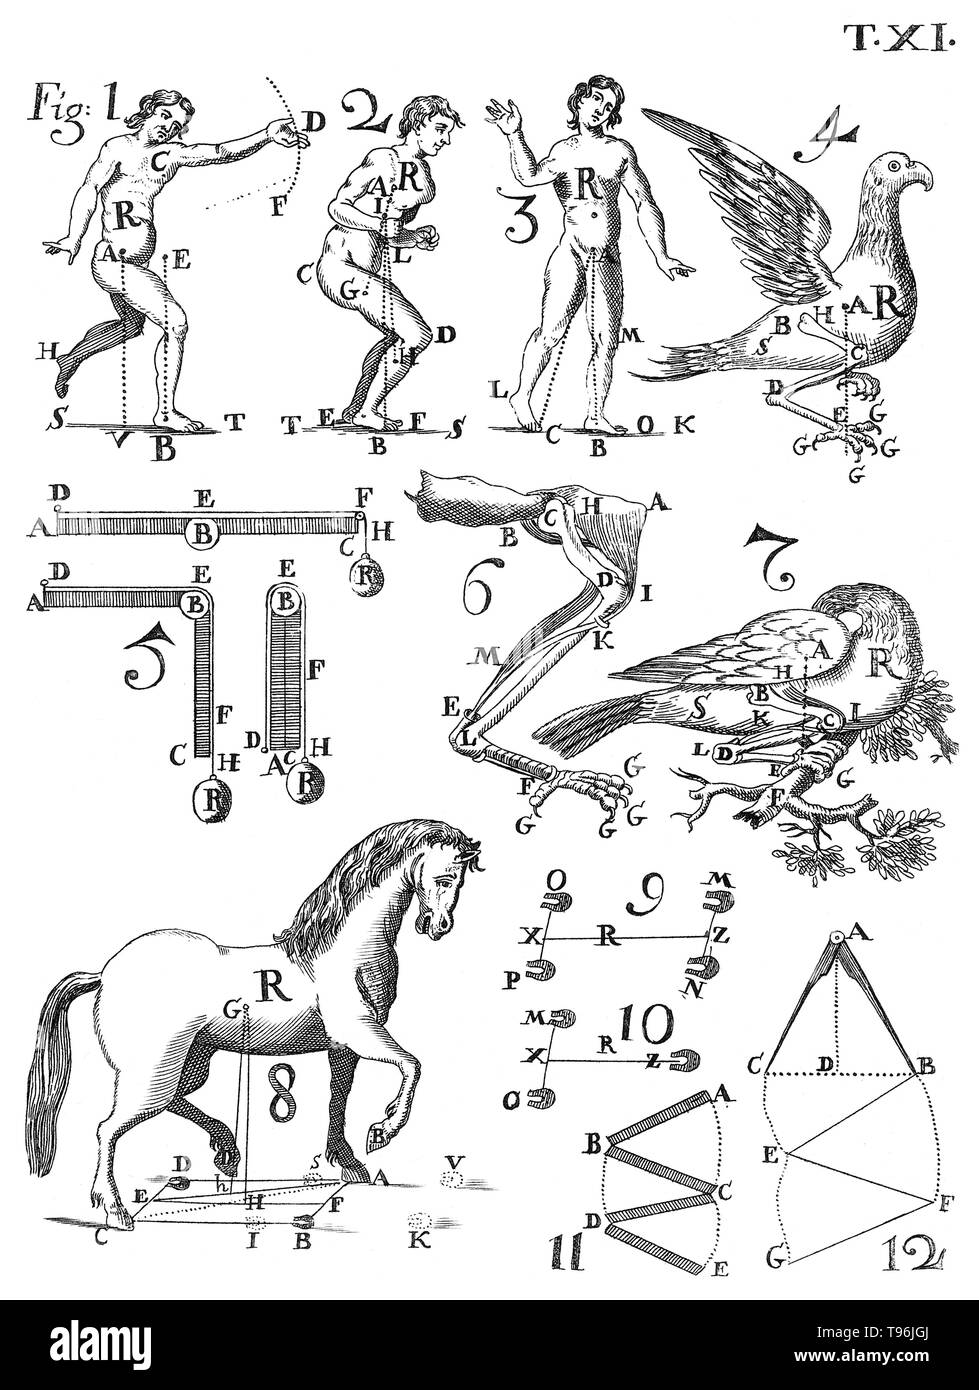 De motu animalium, 1734 edition. Table XI. Giovanni Alfonso Borelli (January 28, 1608 - December 31, 1679) was a Renaissance Italian physiologist, physicist, and mathematician. He contributed to the modern principle of scientific investigation by continuing Galileo's custom of testing hypotheses against observation. Trained in mathematics, Borelli also made extensive studies of Jupiter's moons, the mechanics of animal locomotion and, in microscopy, of the constituents of blood. Stock Photo